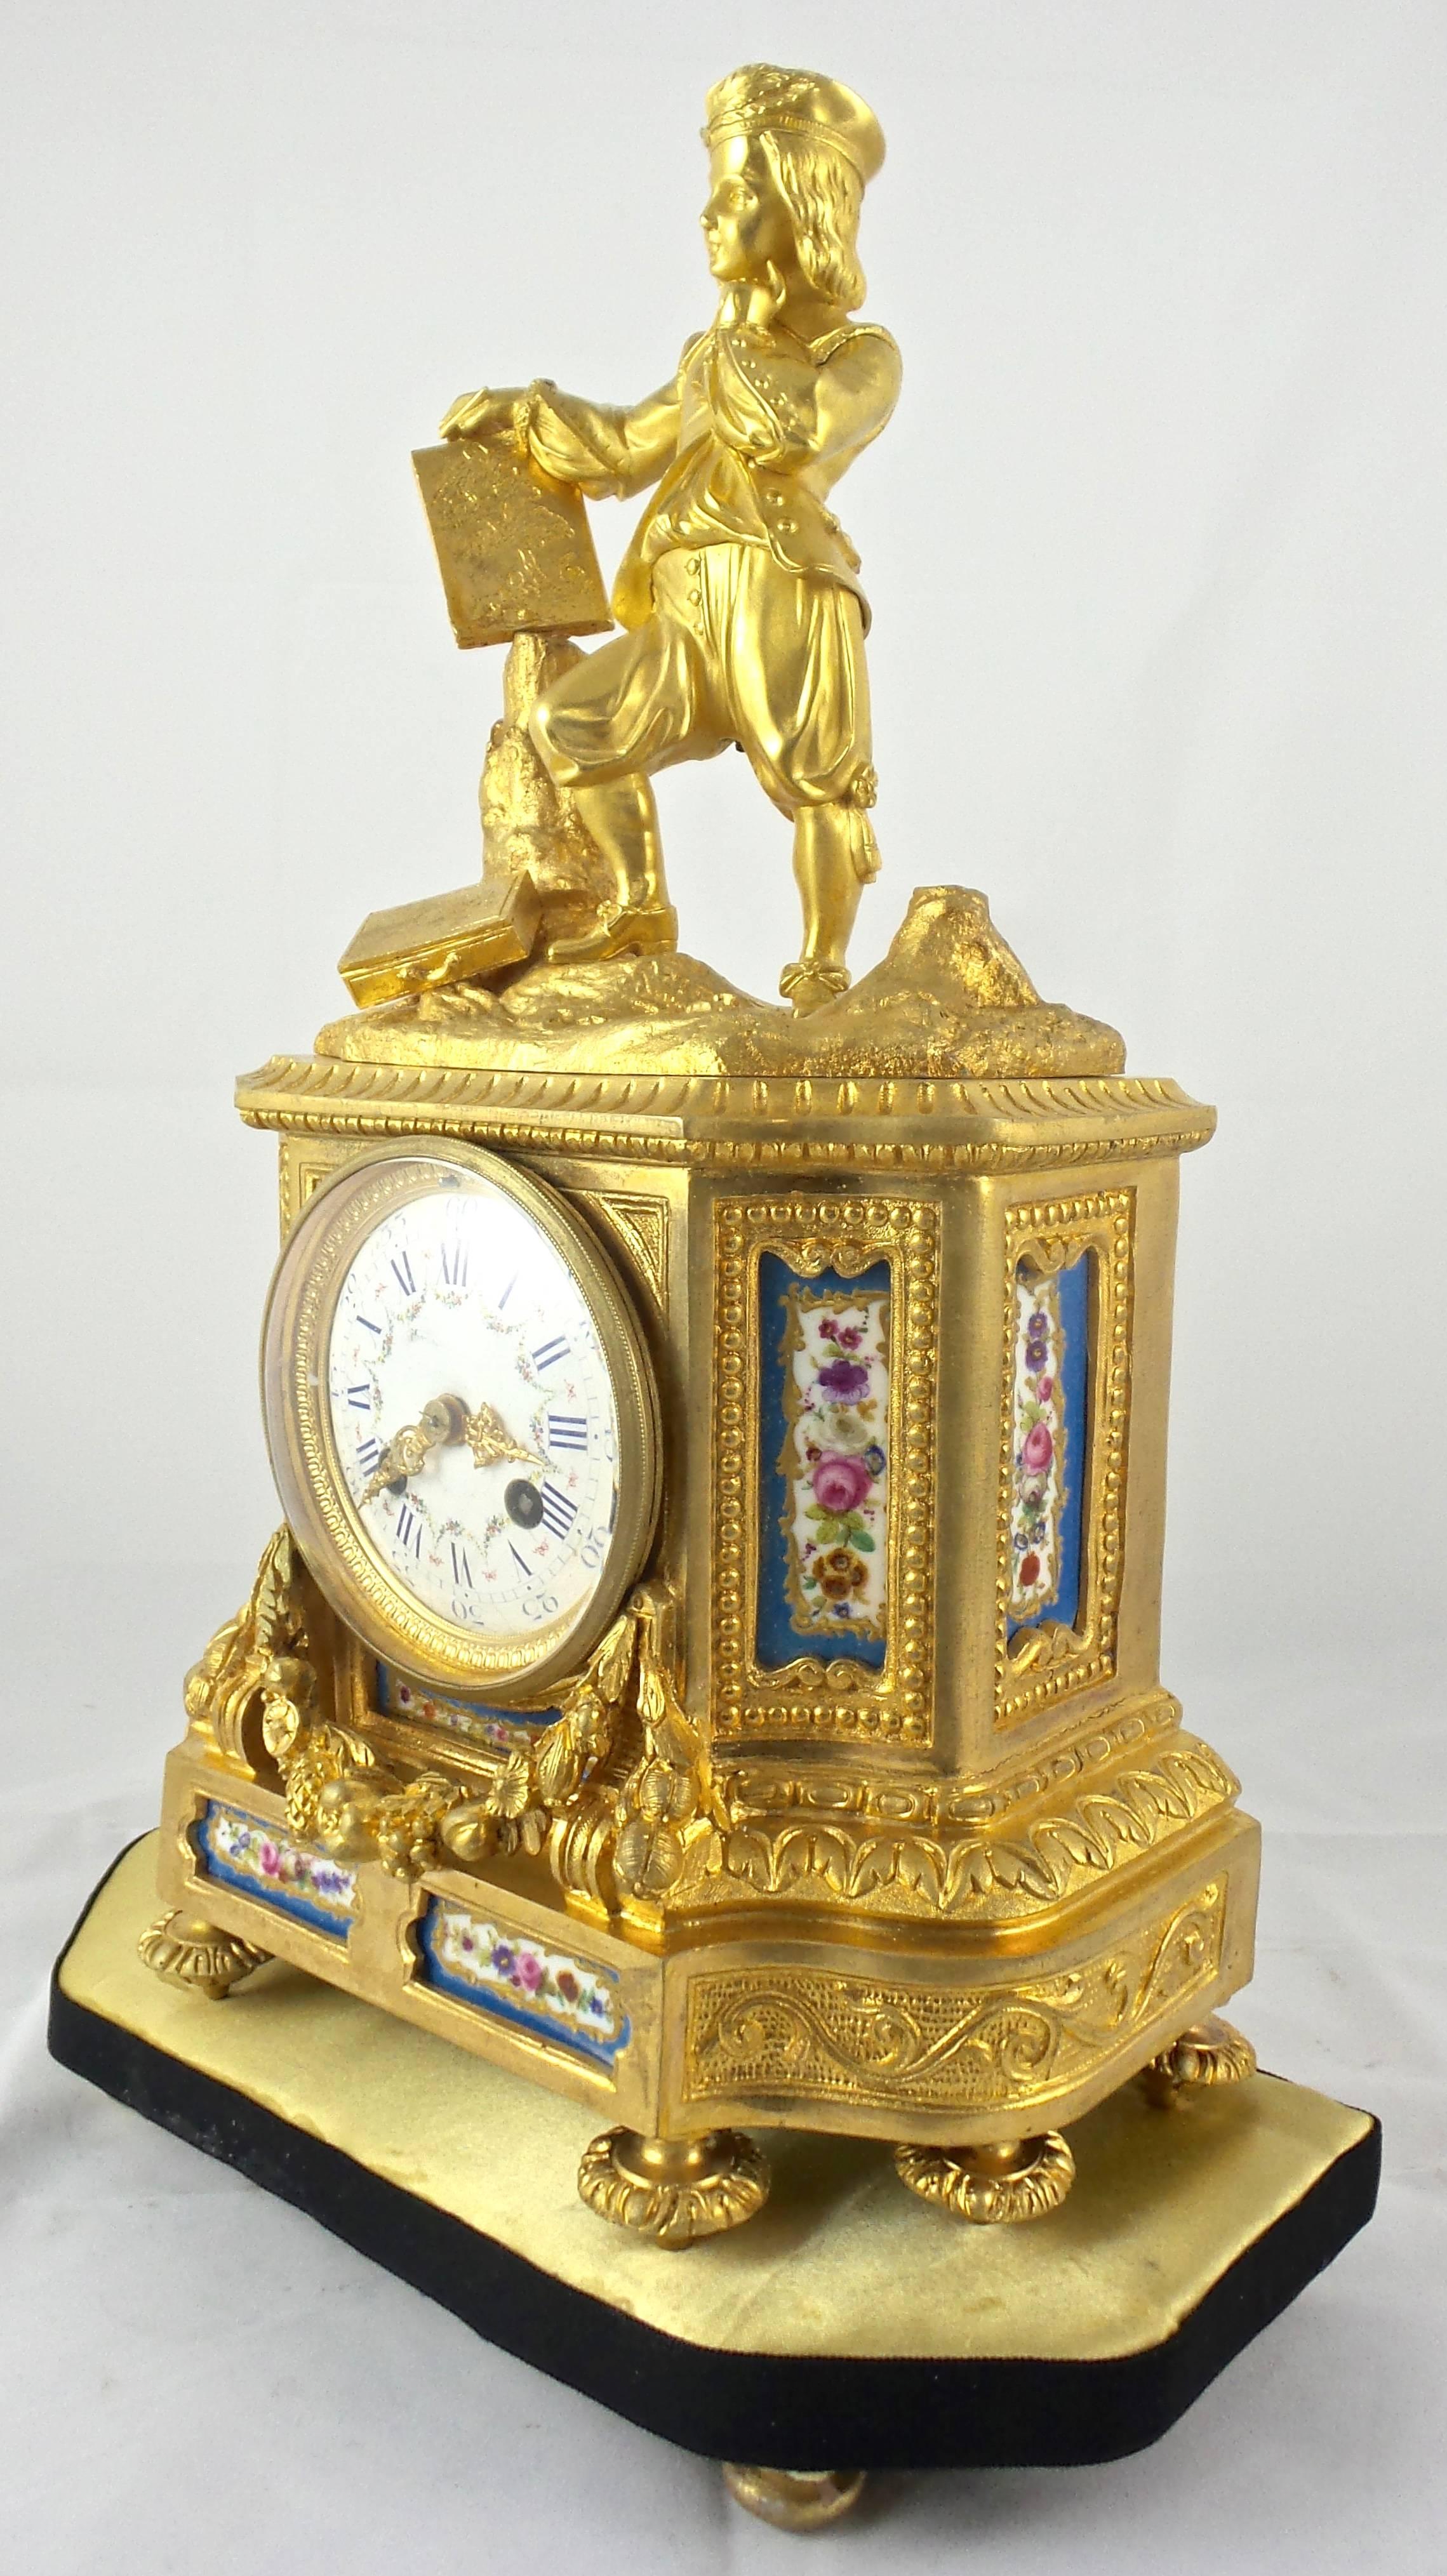 Gilt ormolu bronze 19th century French mantel clock with blue Sèvres porcelain
Figural gent standing on top with fine detail and posture
Draped vines and other adorned patterns
Standing on a base
Convex floral painted porcelain dial and bevelled